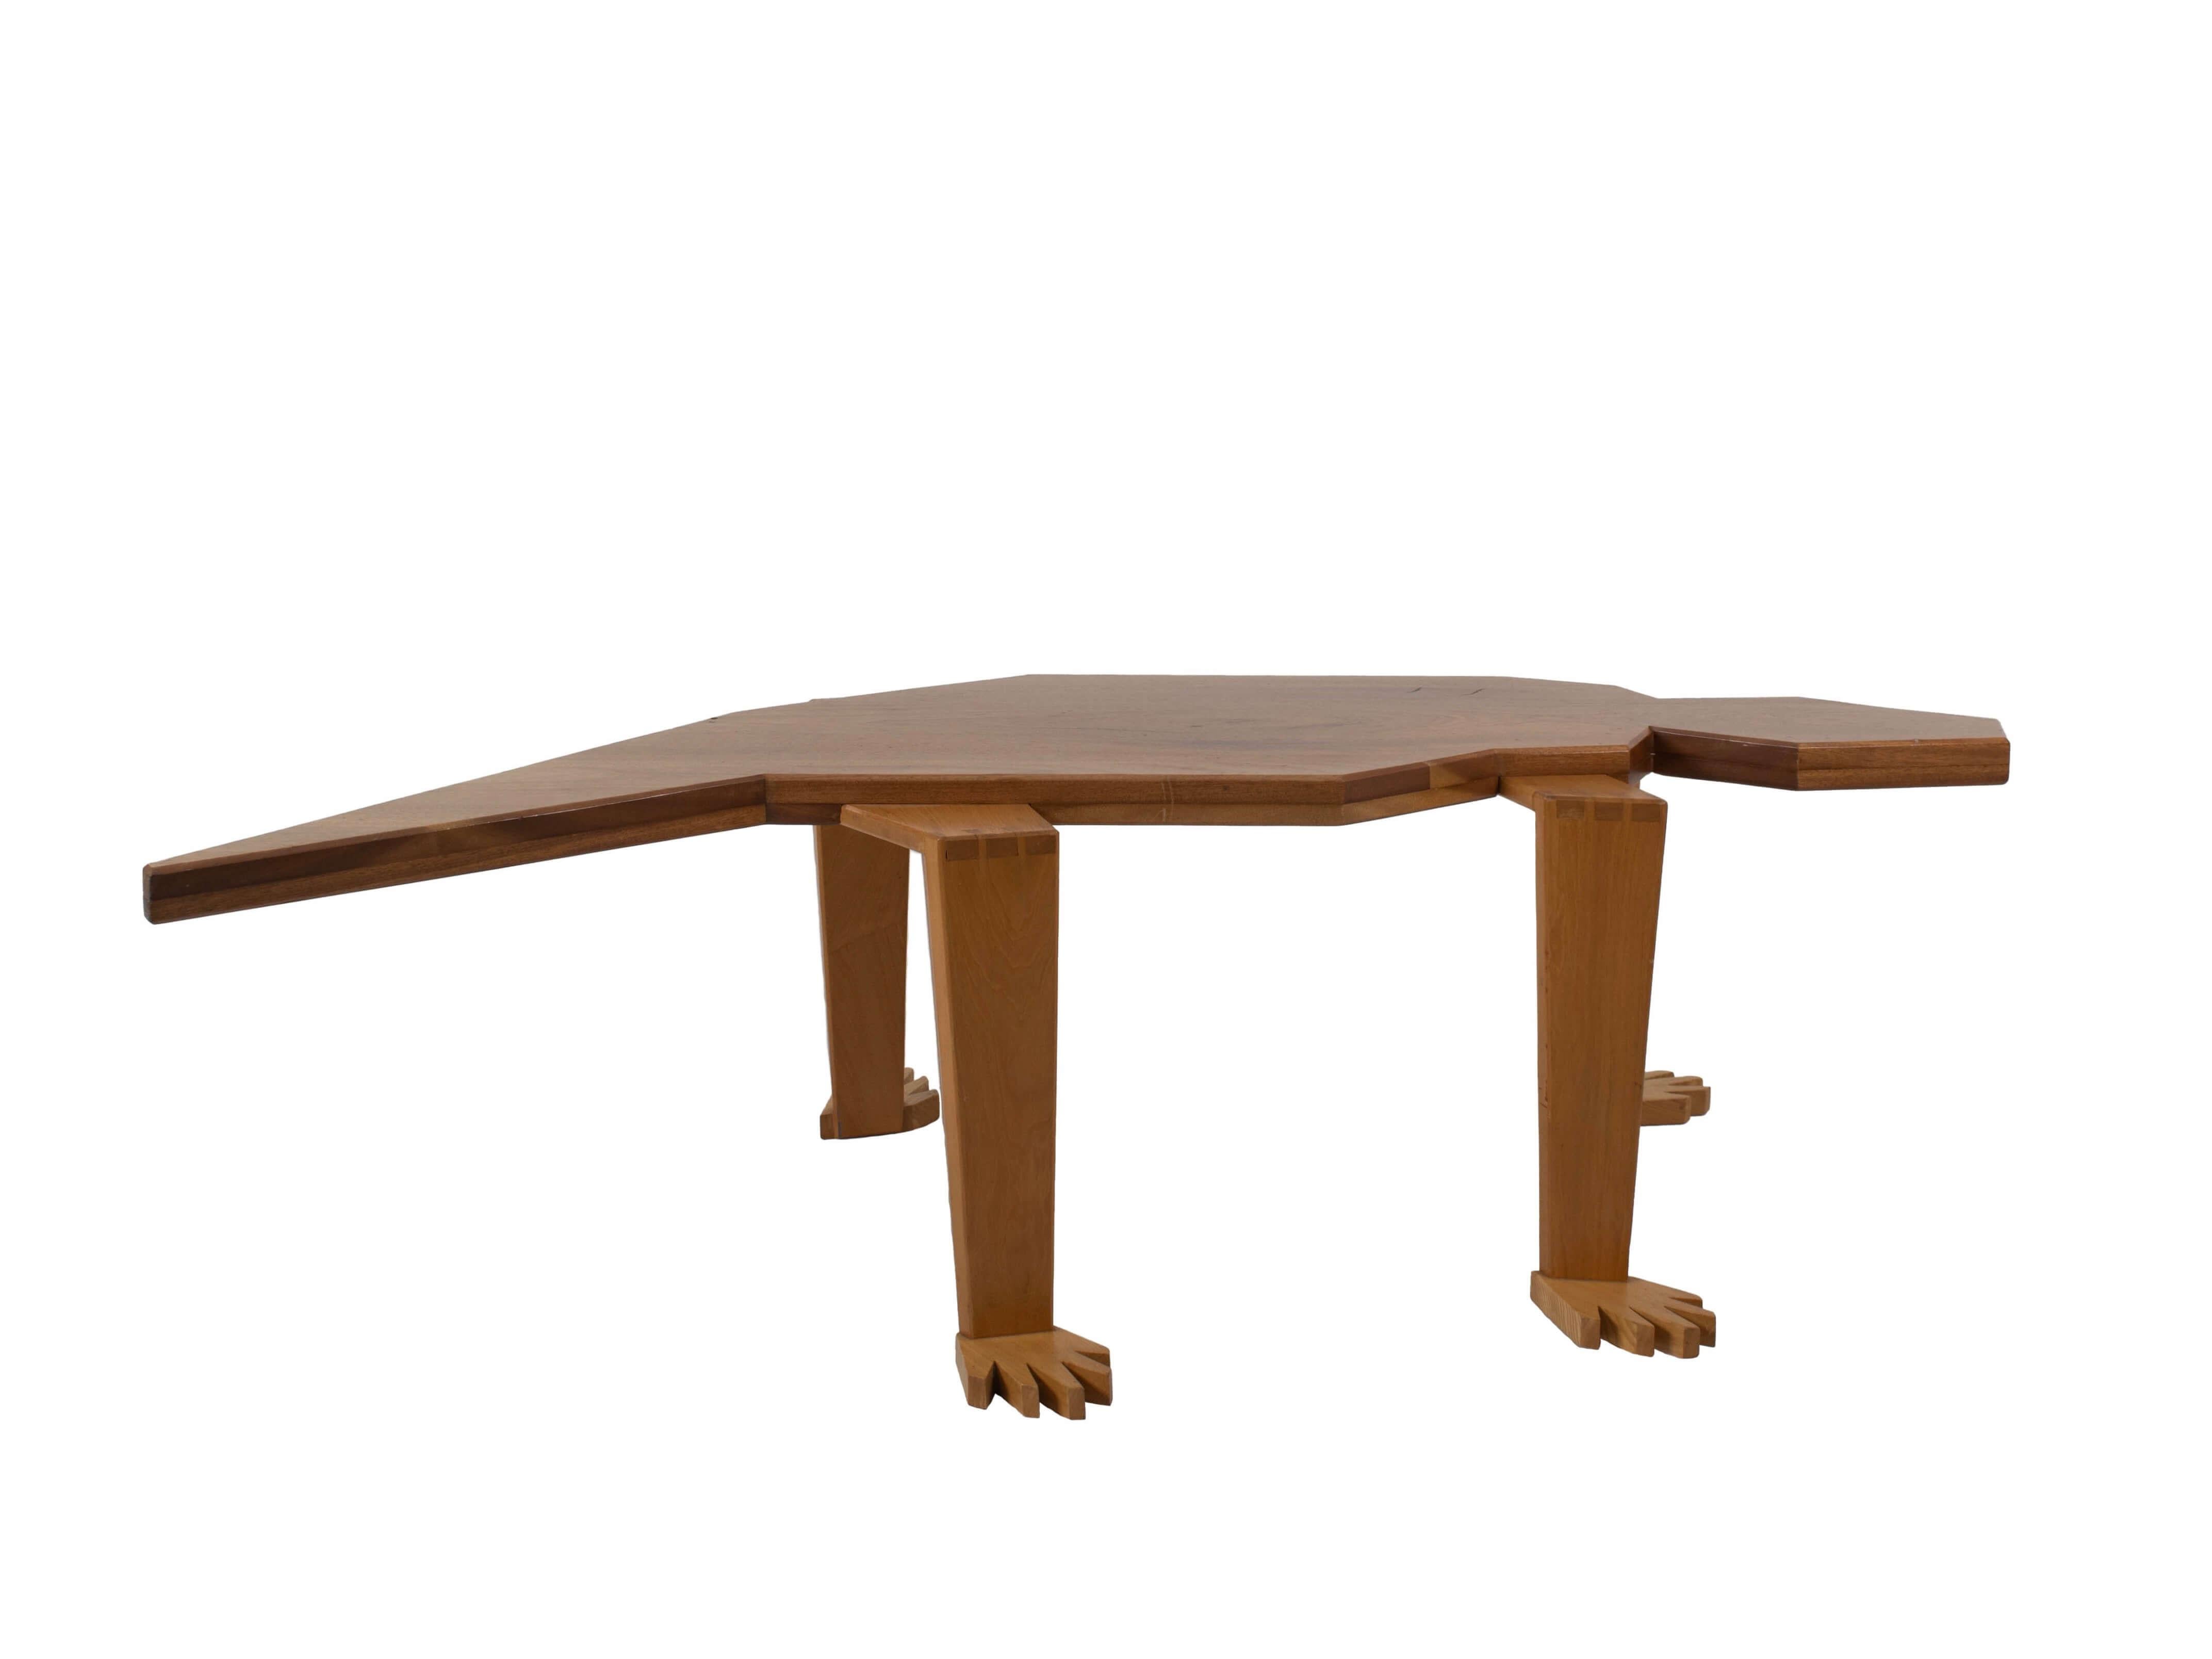 Artisan Wooden 'Lizard' coffee table, probably 1980s. This table is unique in its kind, hand made and a true eye-catcher in your interior. It has two layers of wood on the body of the lizard. The legs have dovetail joints. It has some wear and tear,